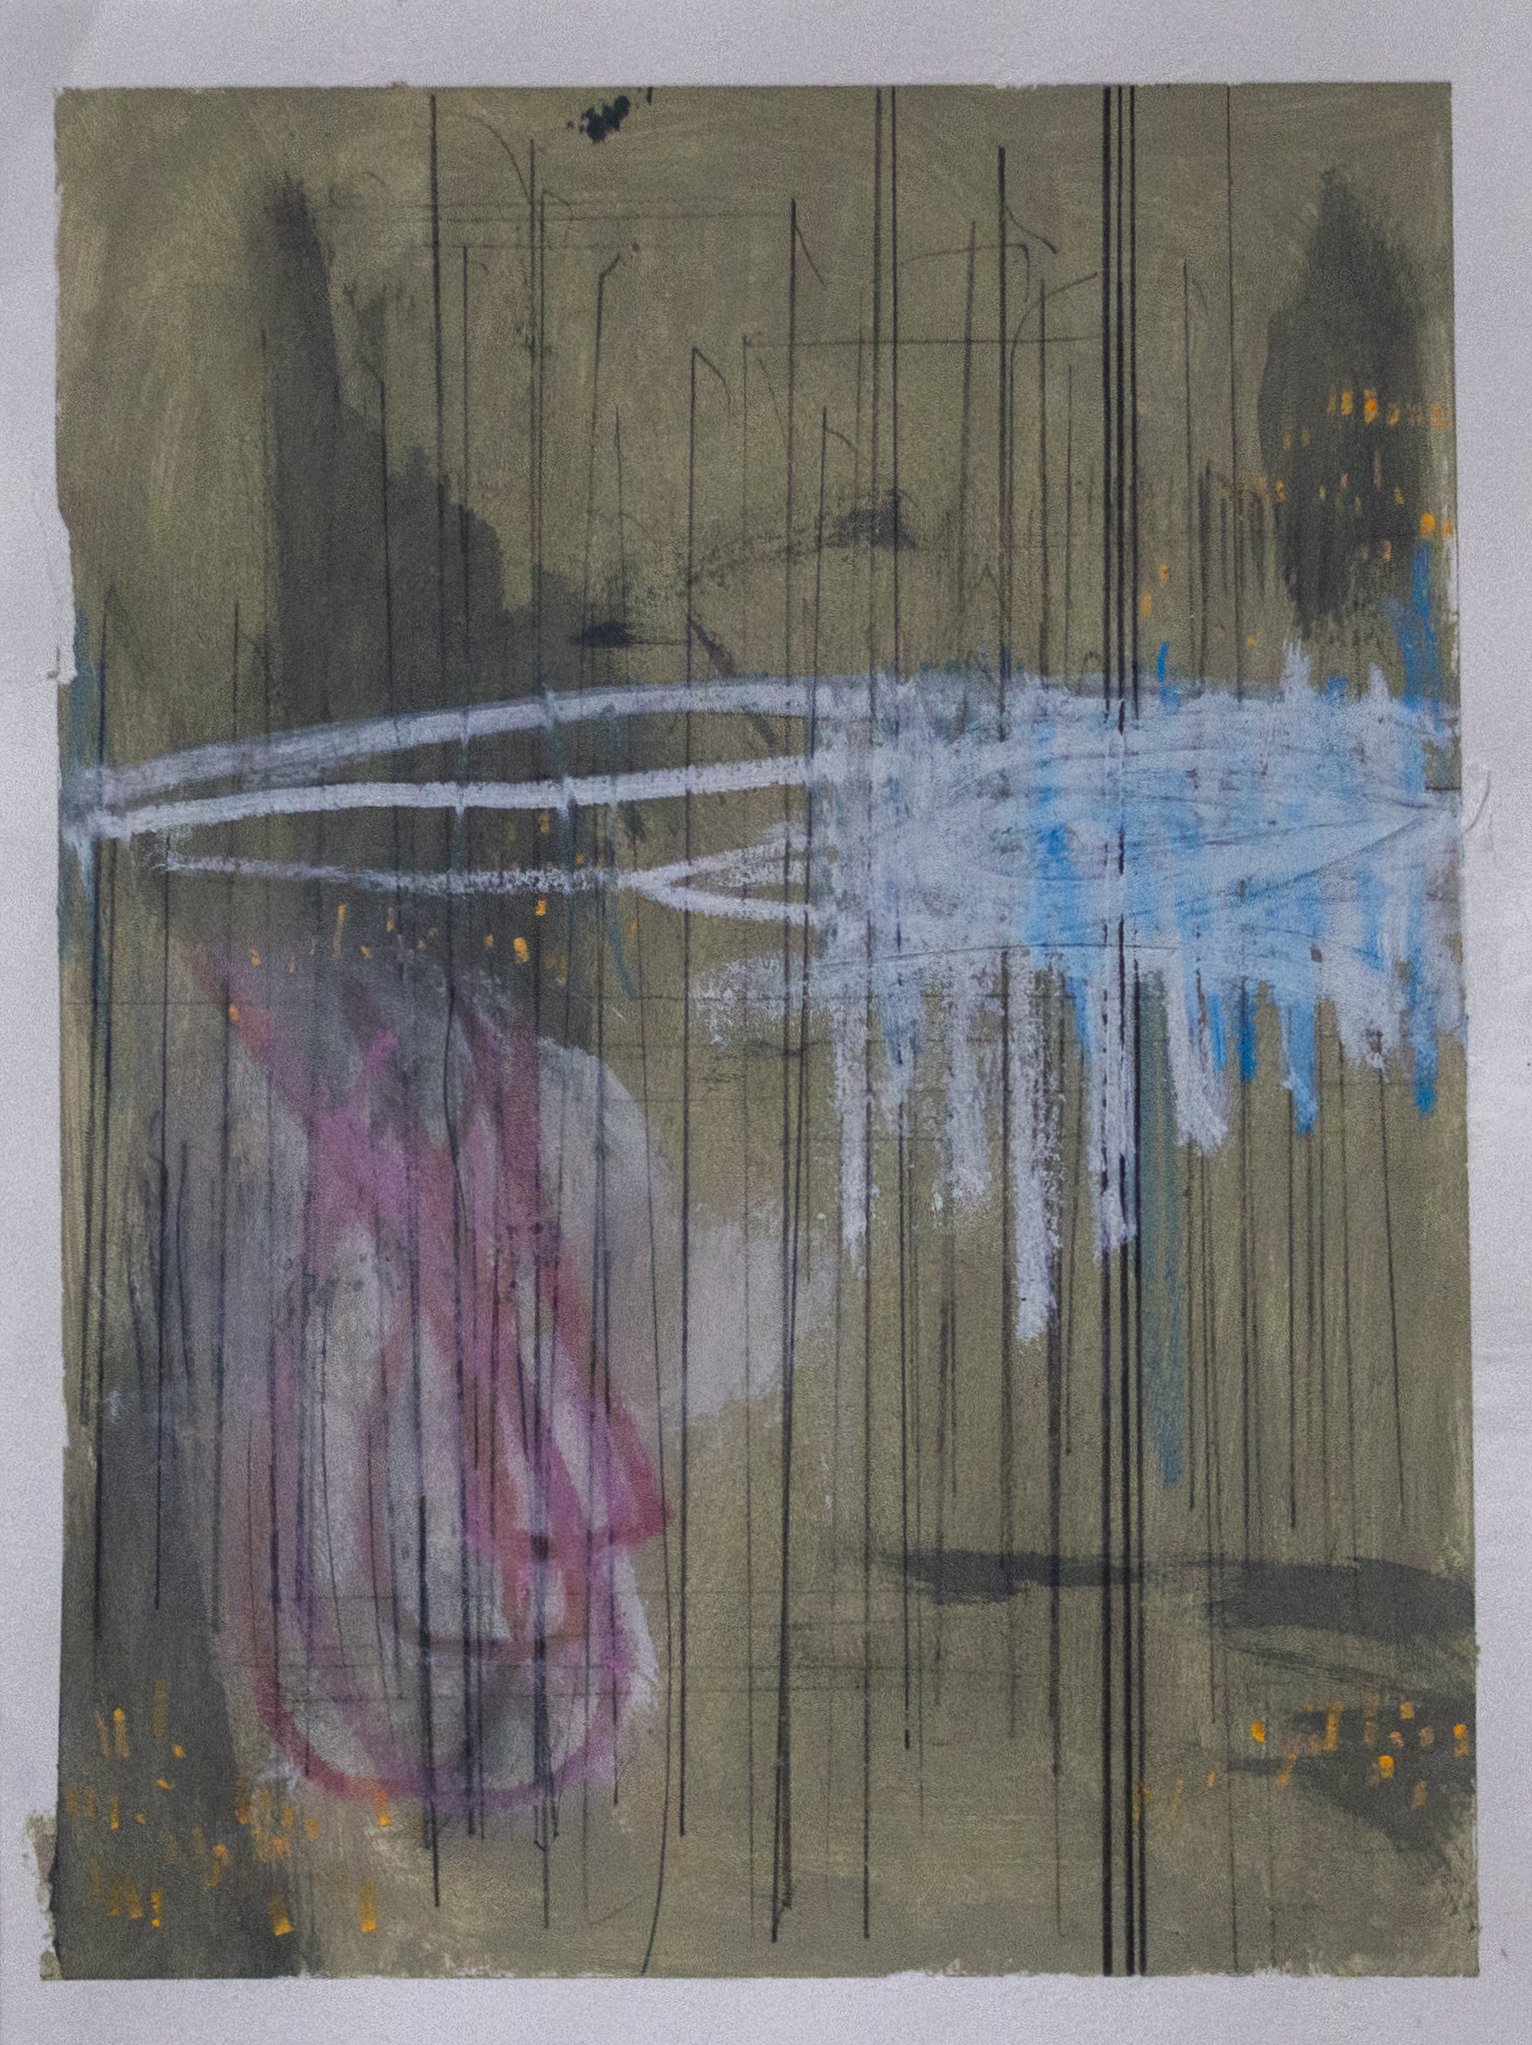   The City Sleeps with Itself , 2022.  9 x 12 inches  Acrylic, Crayon, Pastel and Pencil on Paper  Private collection 